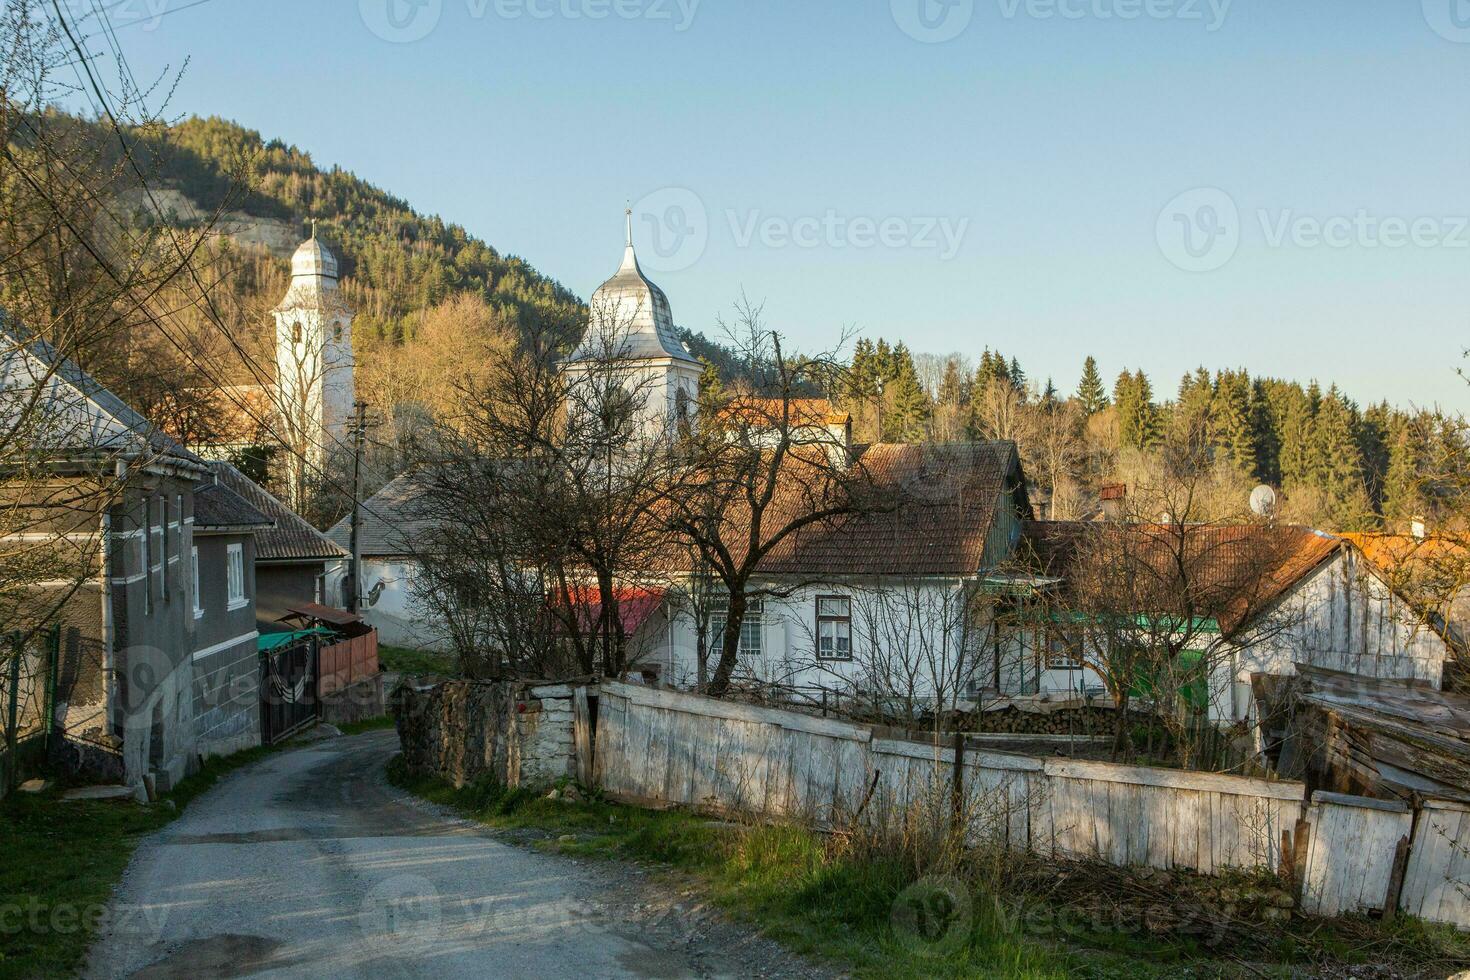 Rosia Montana, a beautiful old village in Transylvania. The first mining town in Romania that started extracting gold, iron, copper. photo